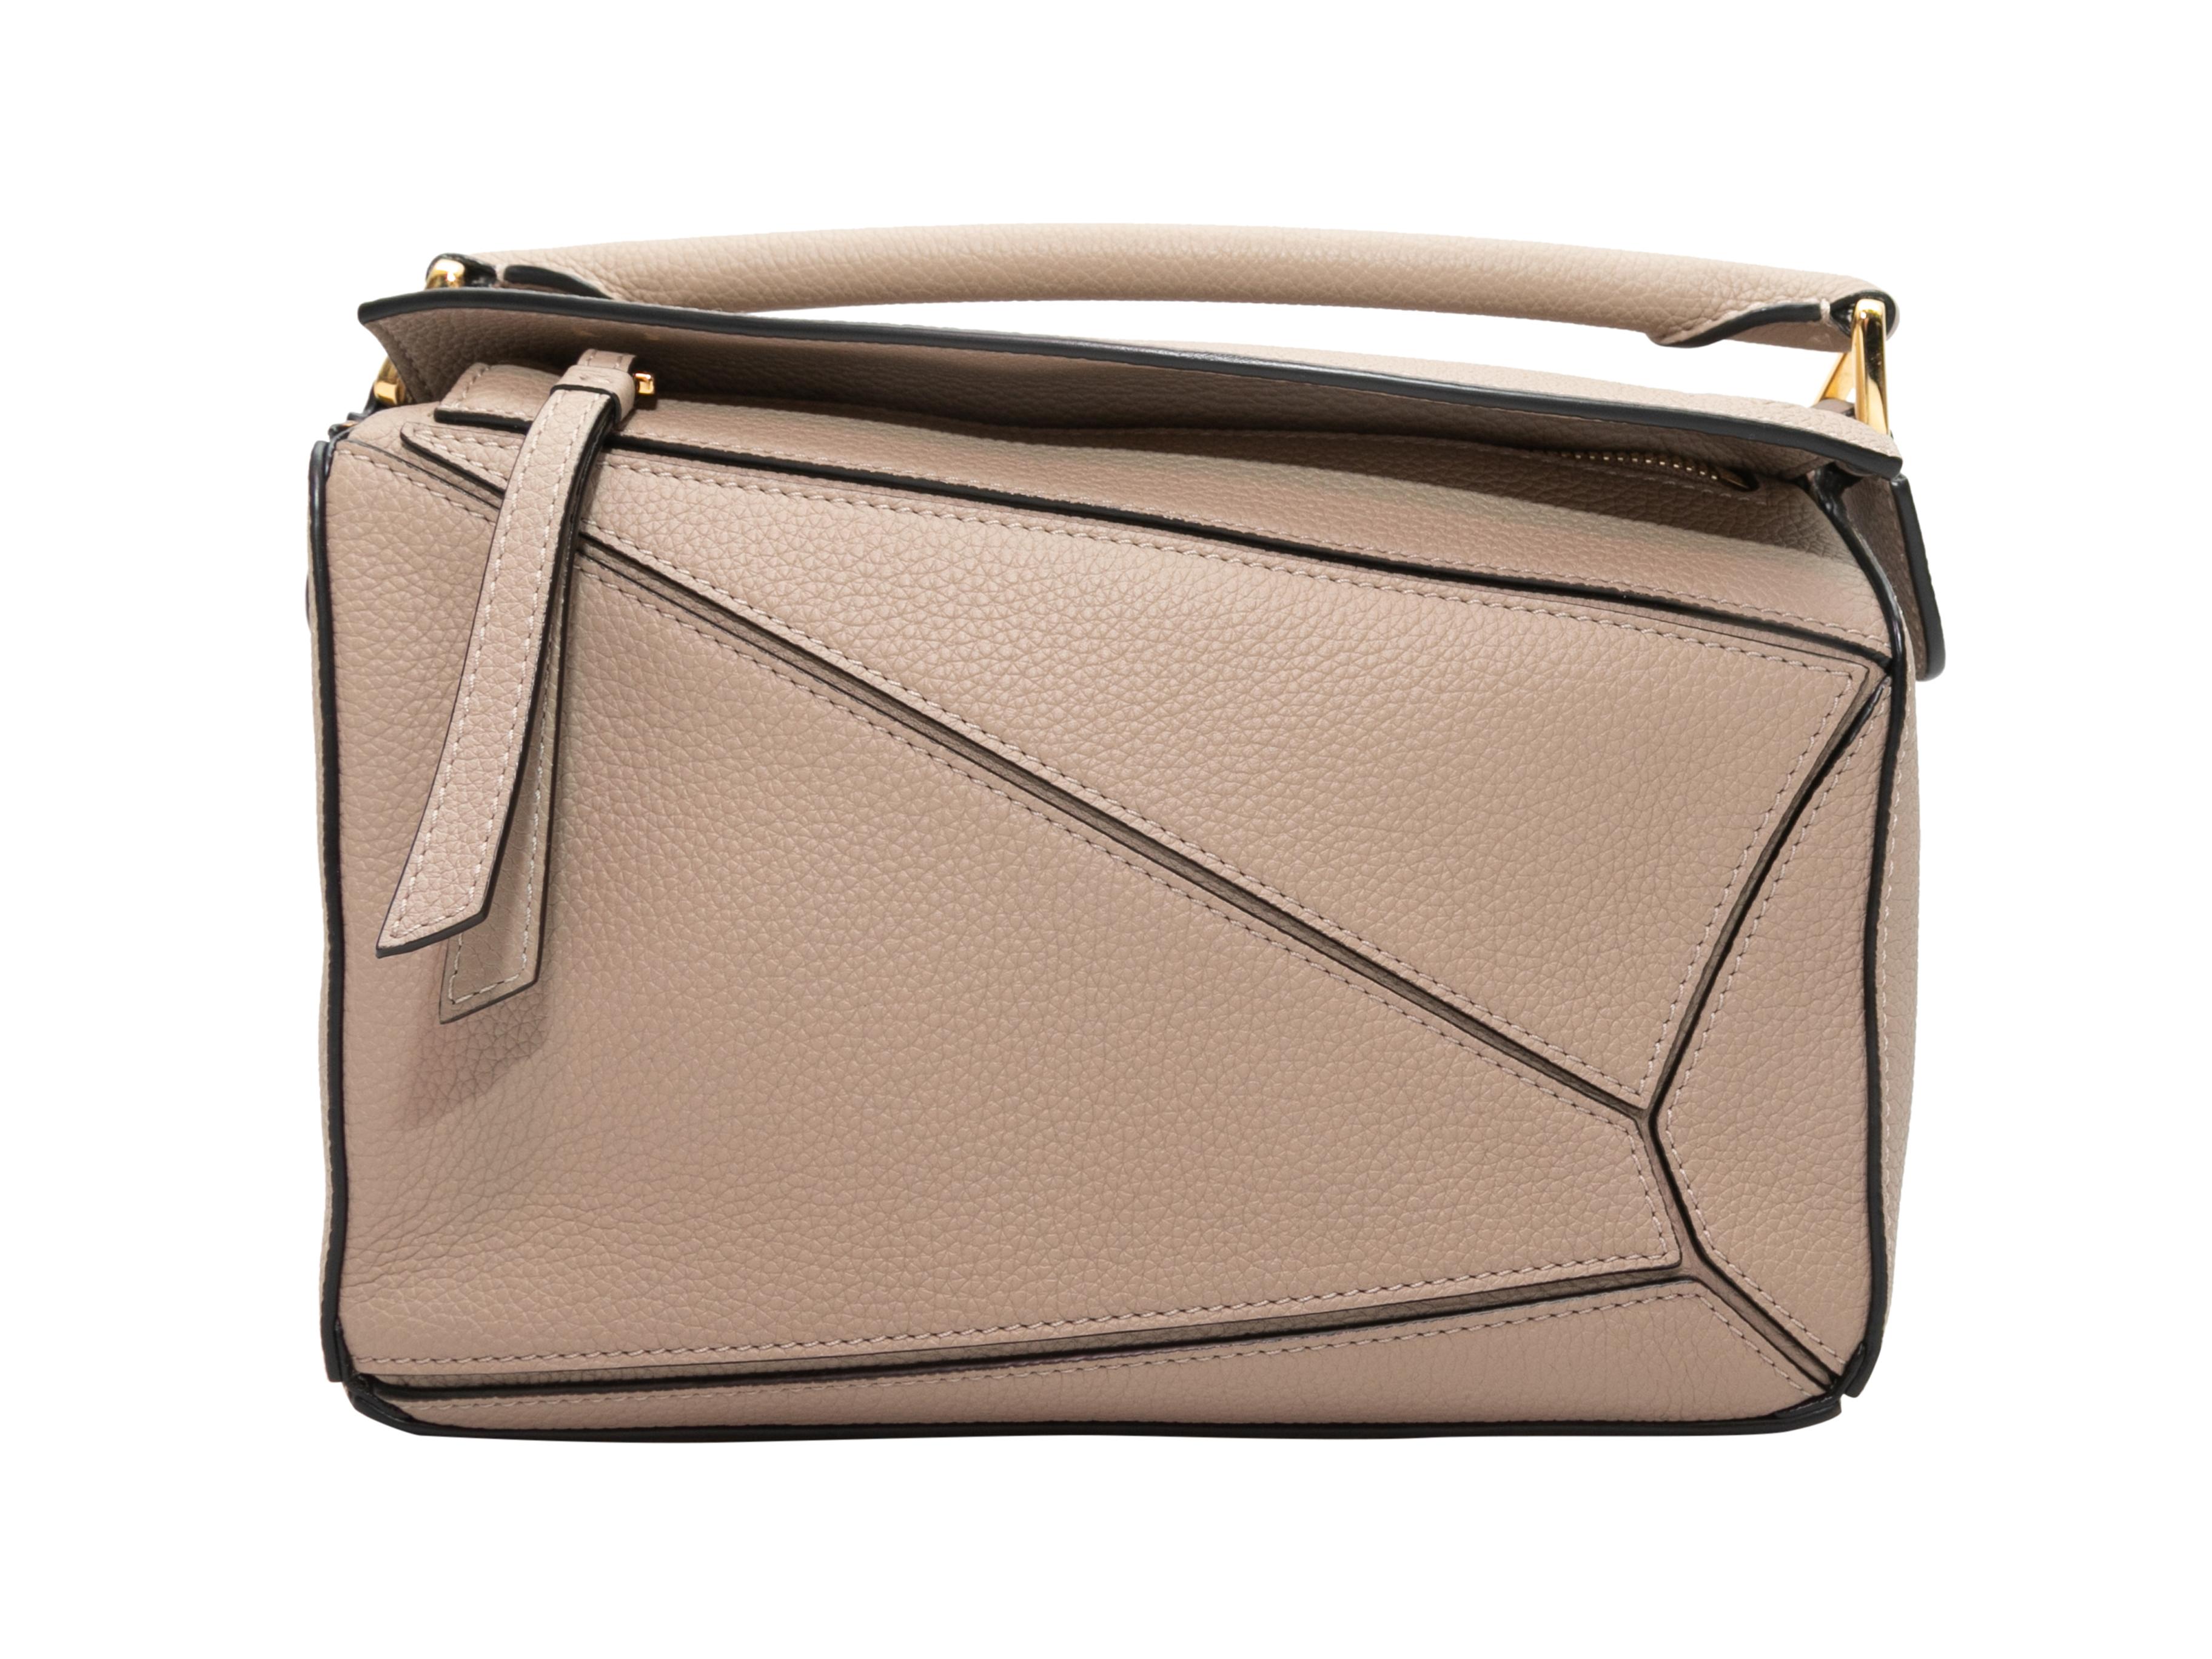 Beige Loewe Small Leather Puzzle Crossbody Bag. The Small Puzzle Crossbody Bag features a leather body, gold-tone hardware, a single flat top handle, a single flat crossbody strap, and a top zip closure. 9.5